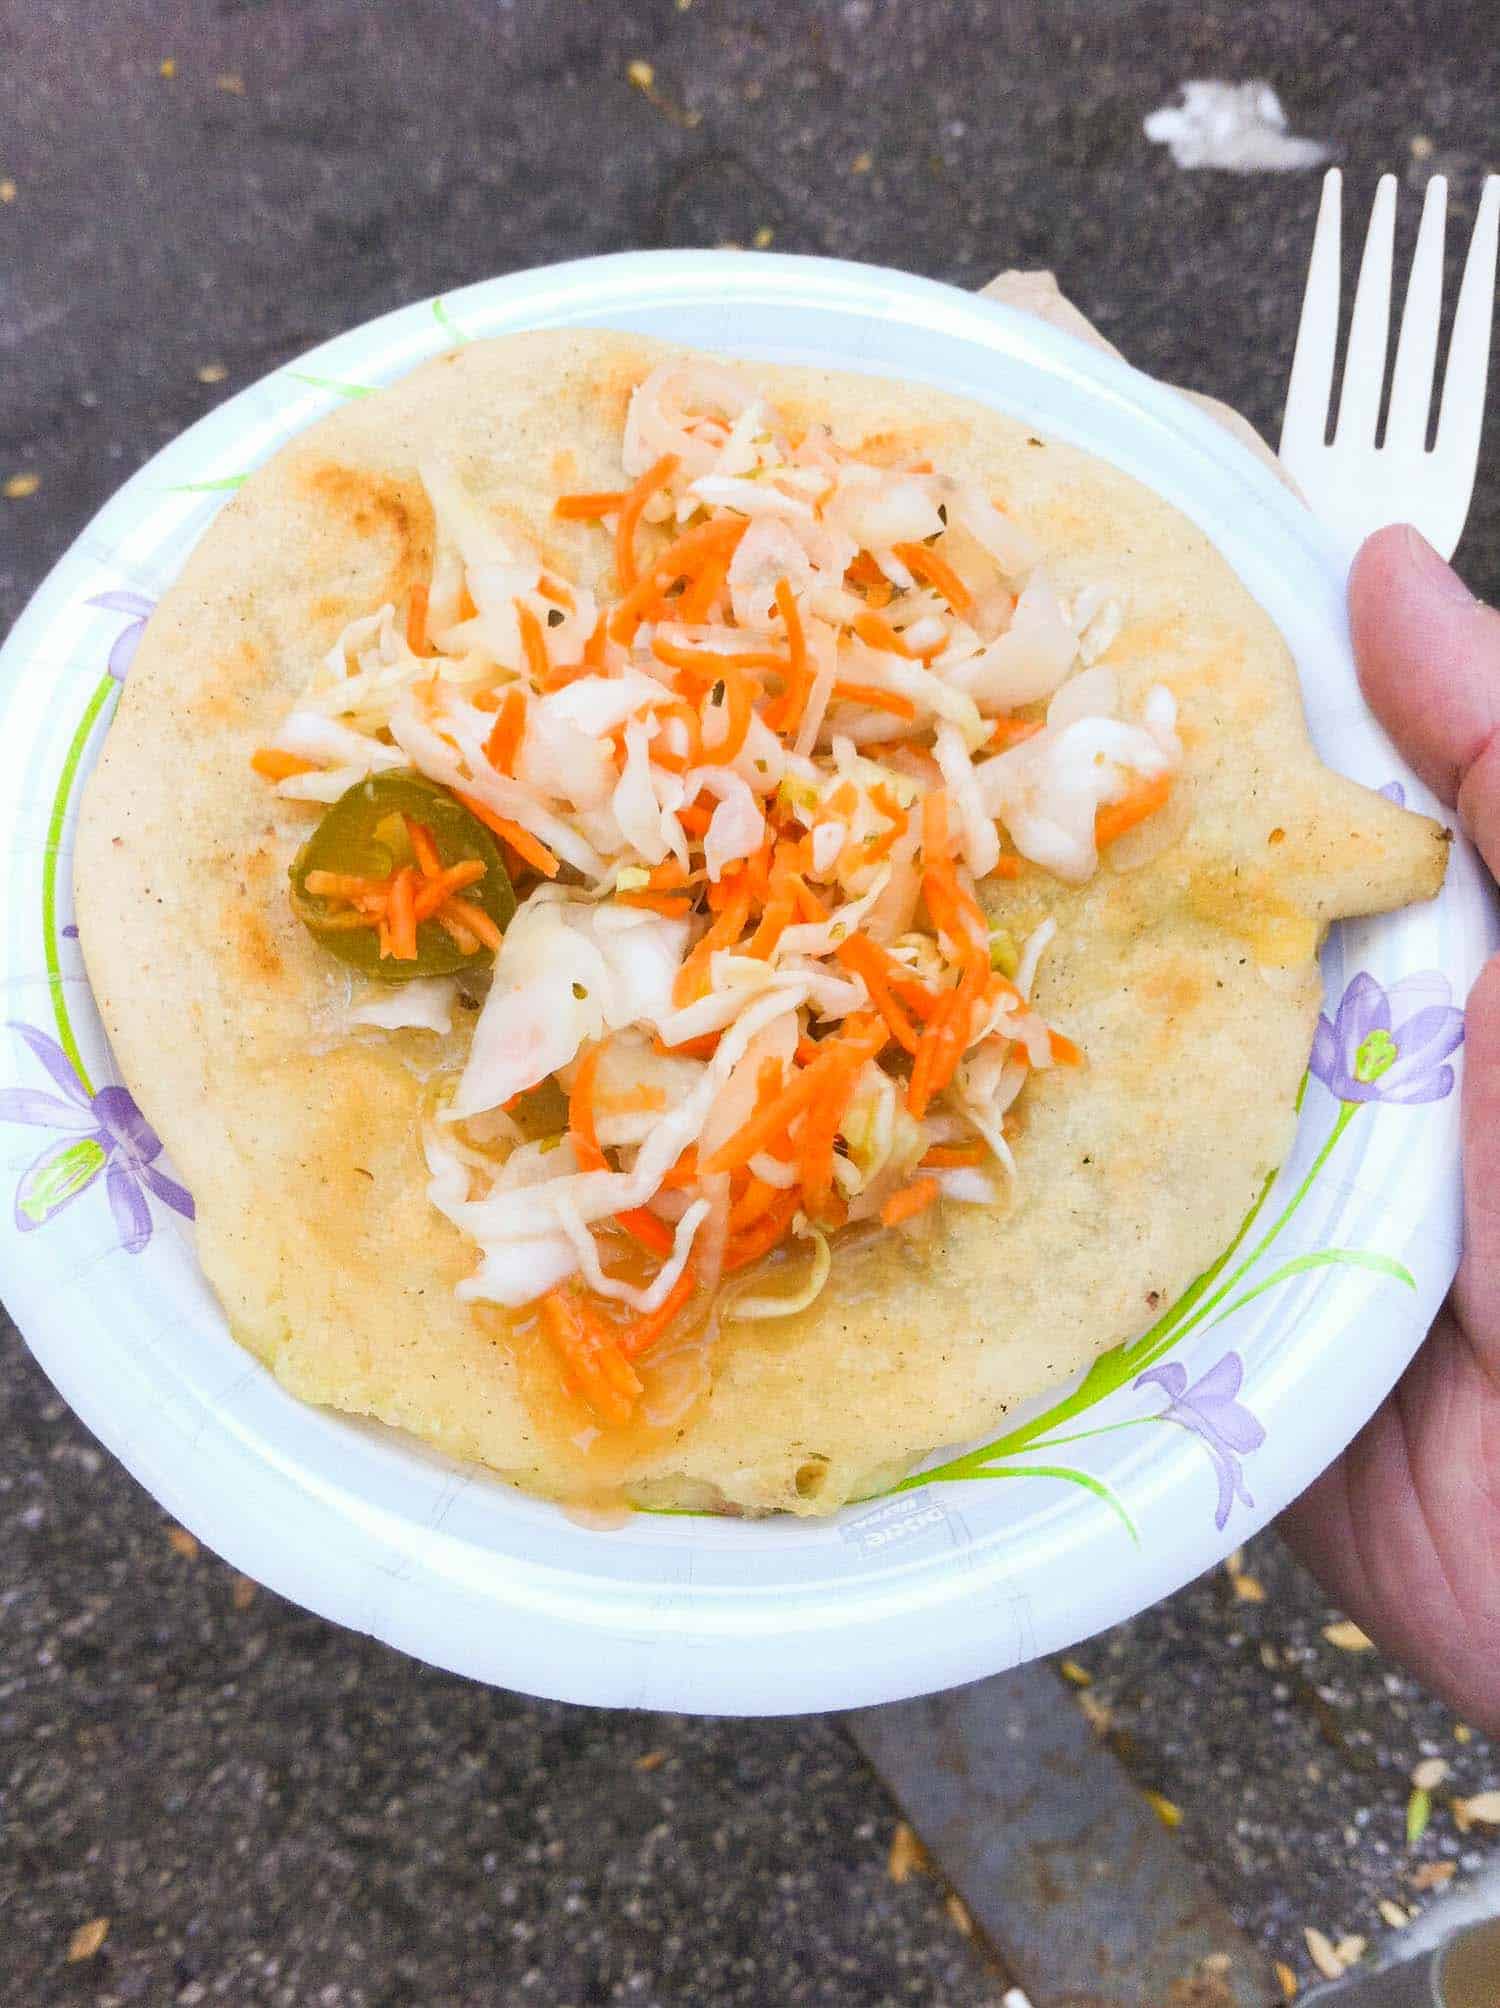 Belizean food pupusa on a paper plate topped with pickled cabbage and carrot